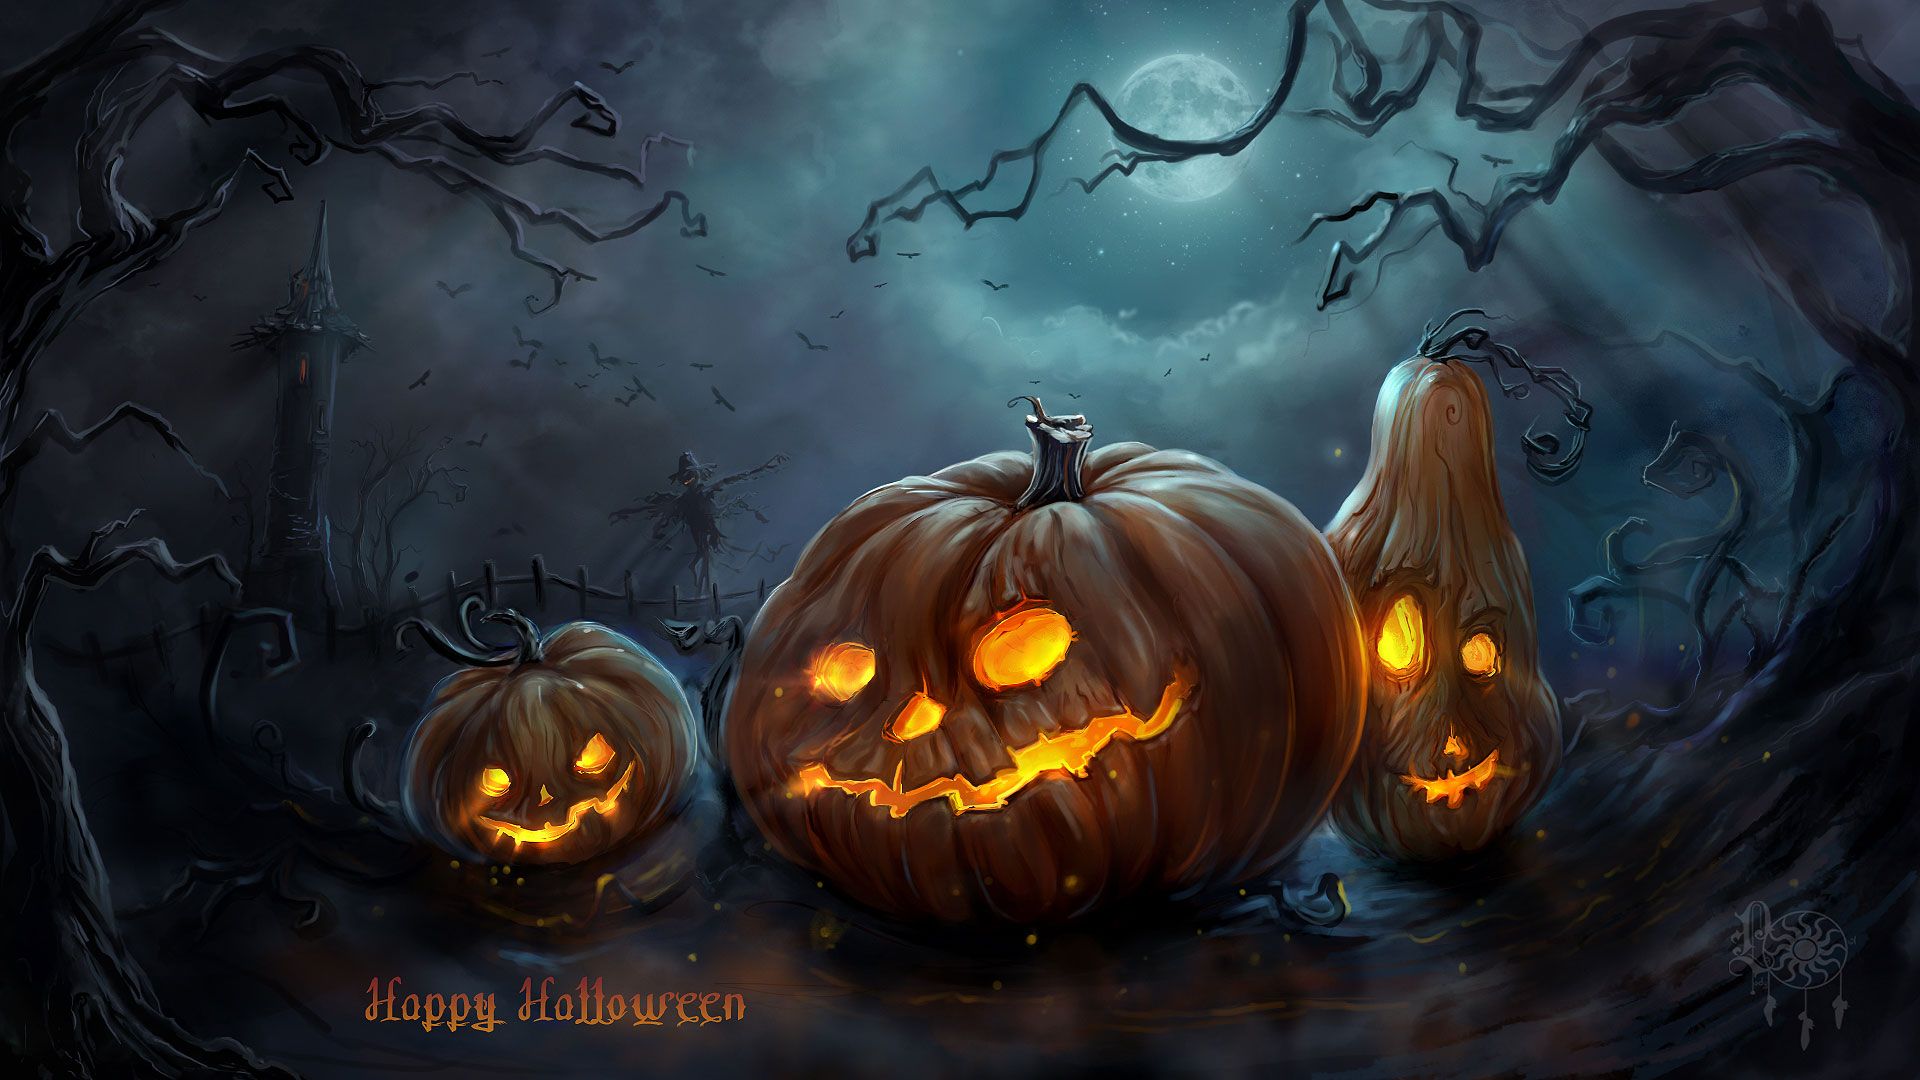 Free download Scary Halloween Background Wallpaper Collection 2014 [1920x1080] for your Desktop, Mobile & Tablet. Explore Free Cute Halloween Wallpaper. Free Halloween Wallpaper, Animated Halloween Wallpaper, Desktop Halloween